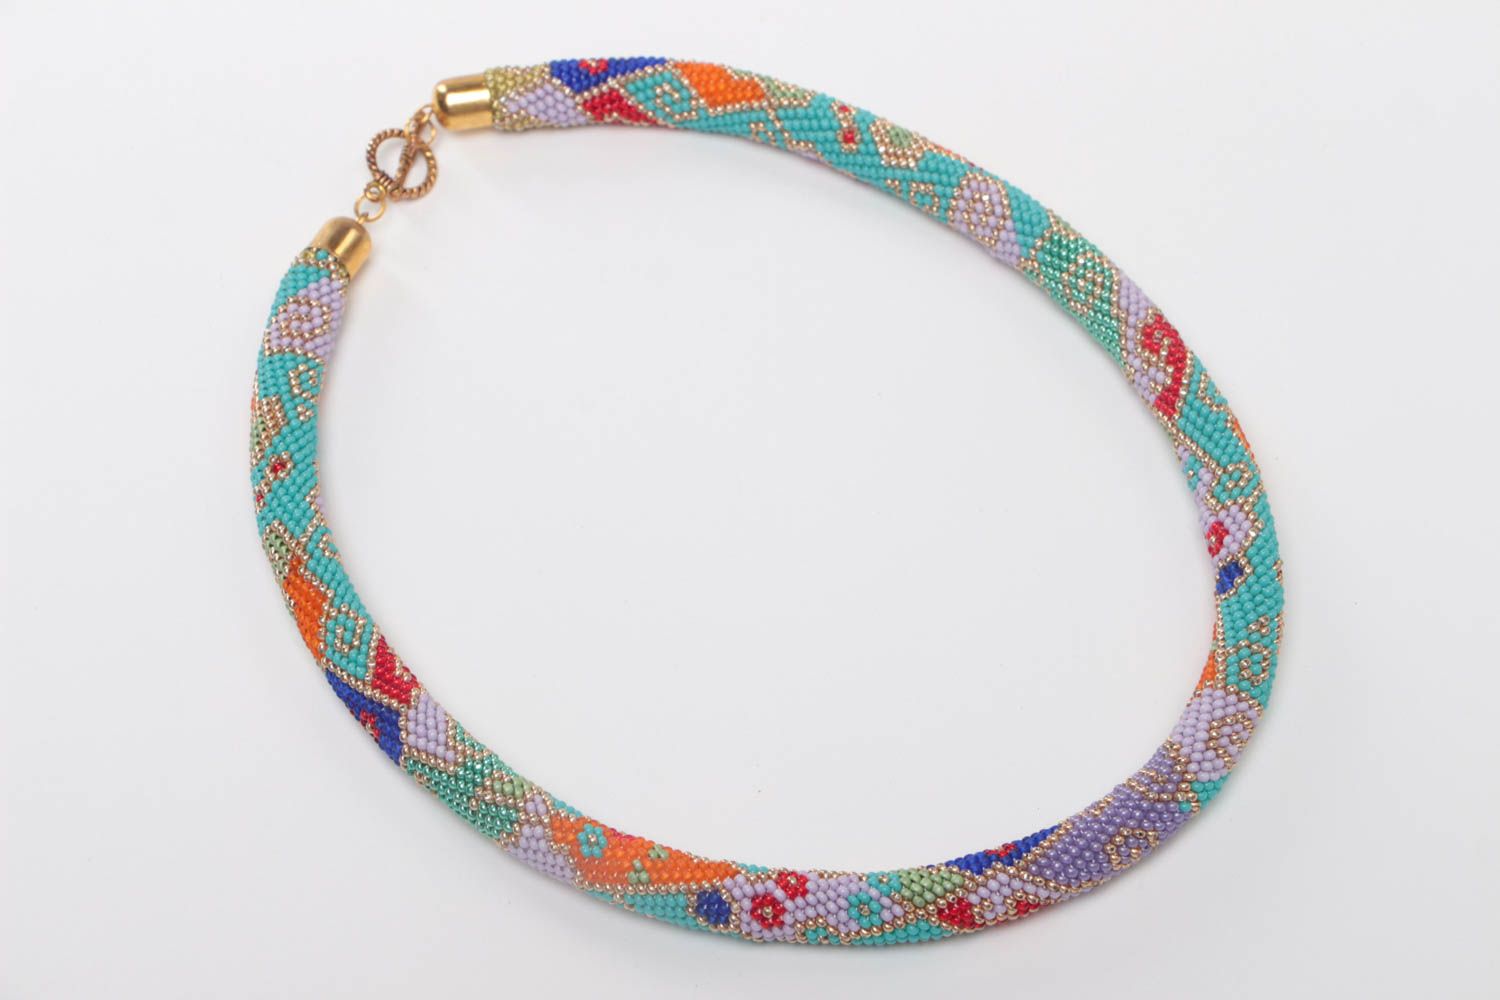 Handmade designer colorful stylish beaded cord necklace with geometric ornament photo 2